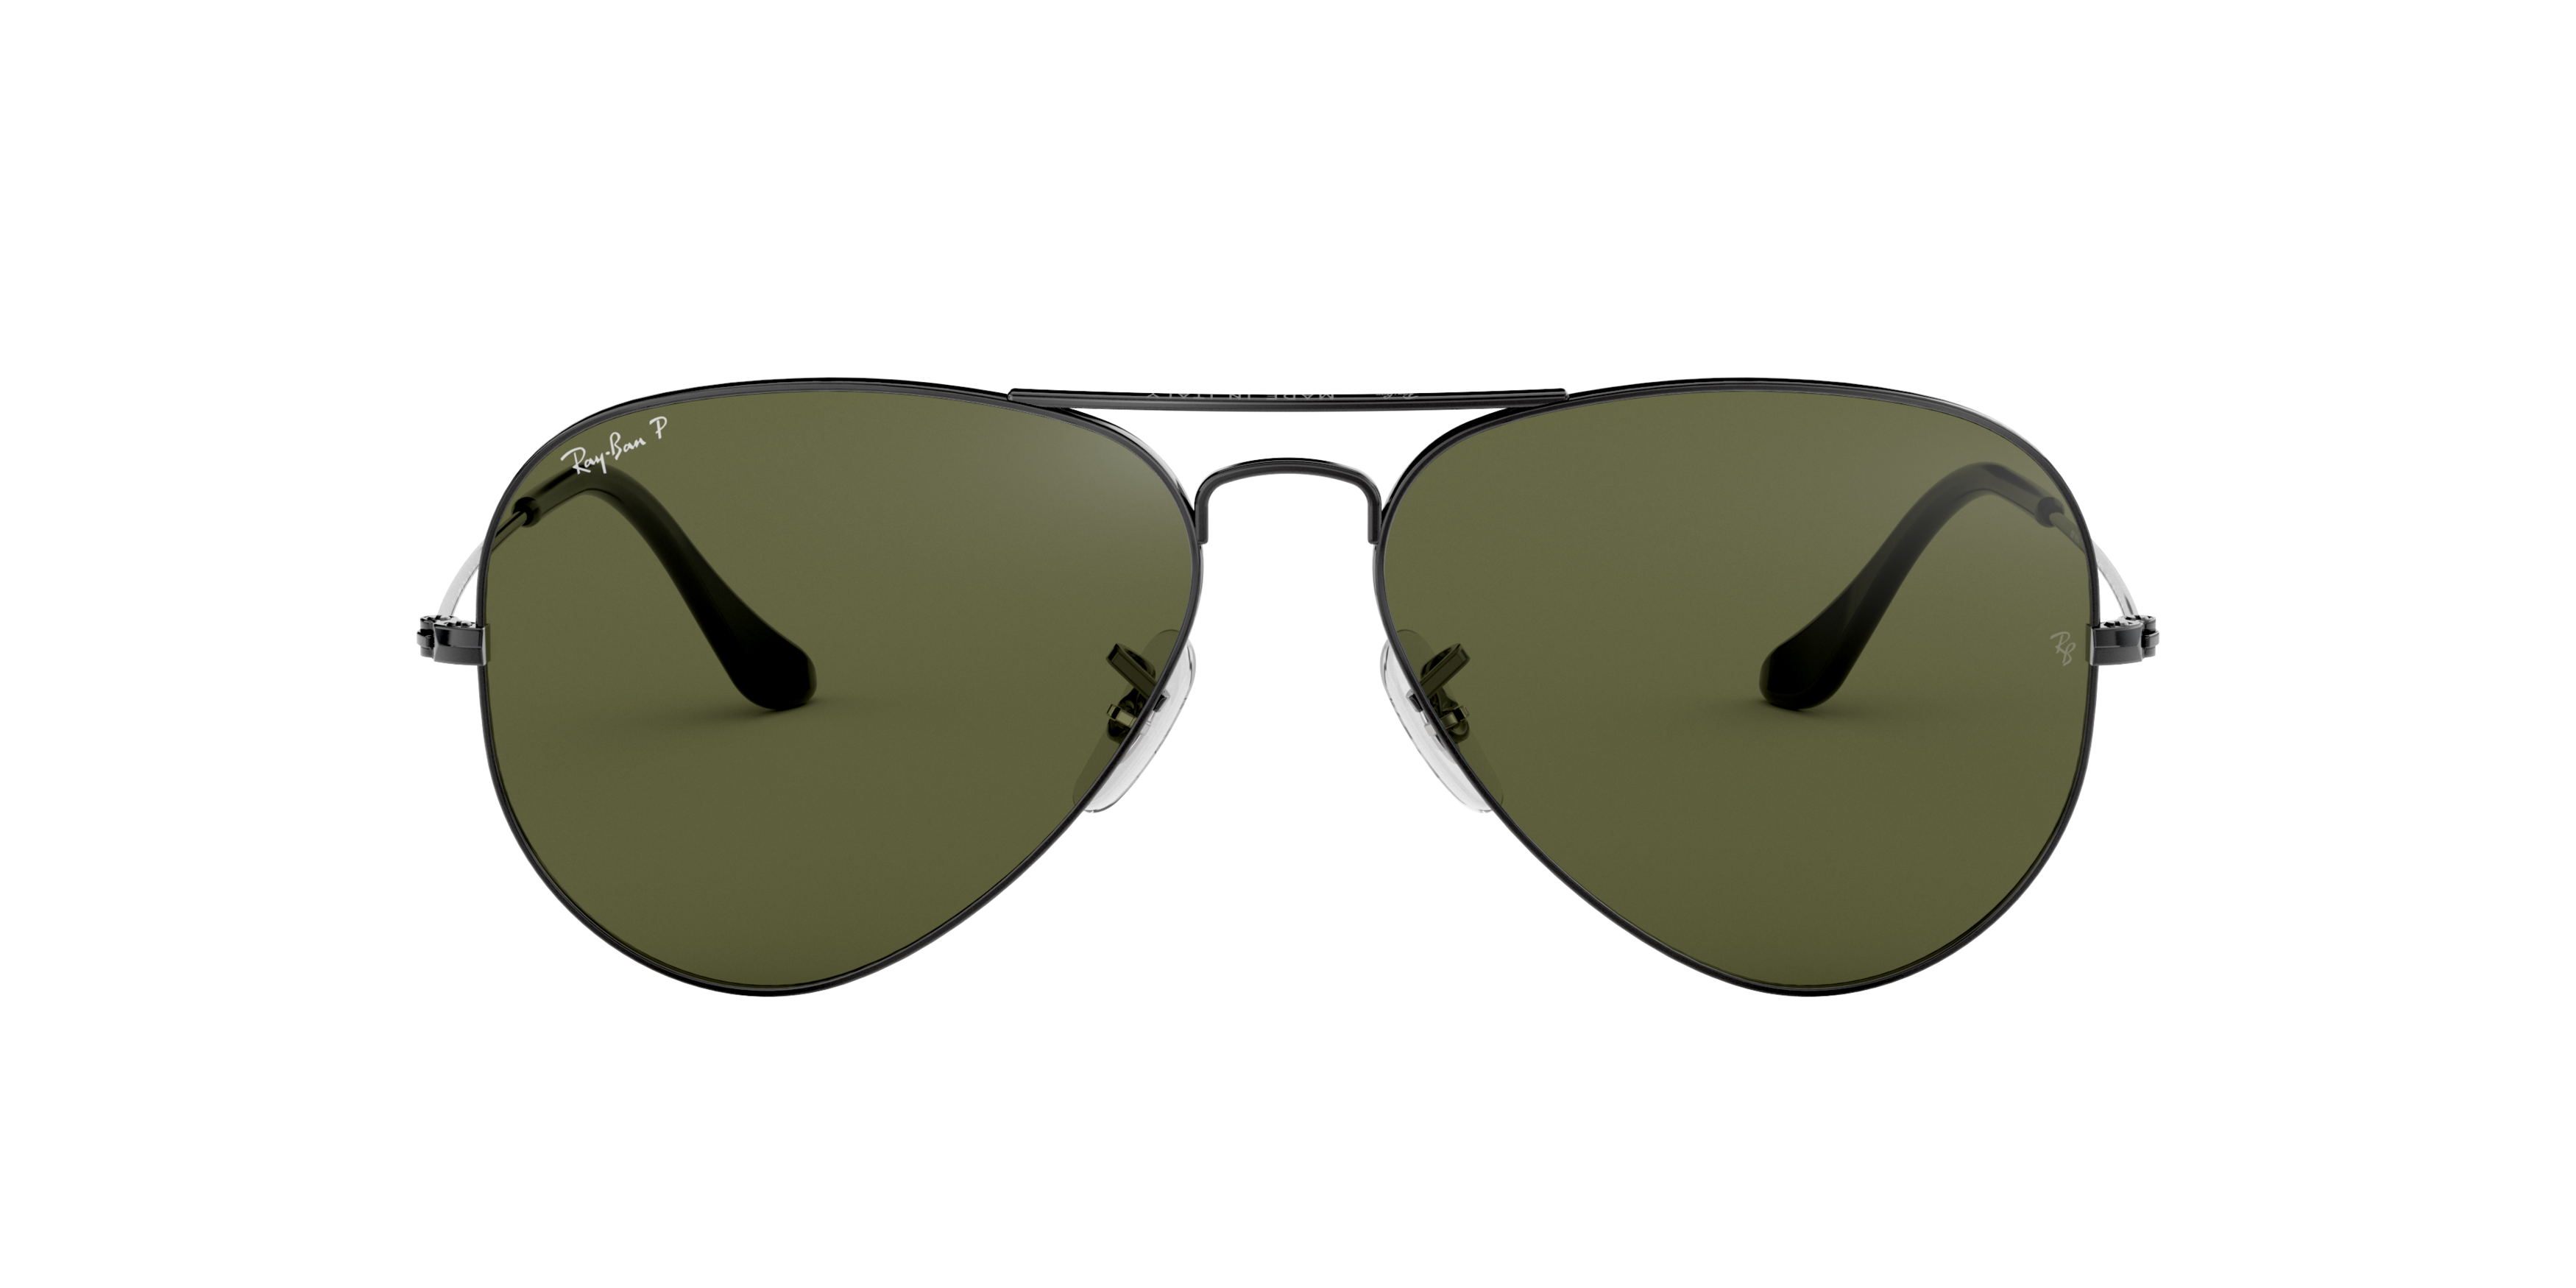 [products.image.front] Ray-Ban Aviator Classic